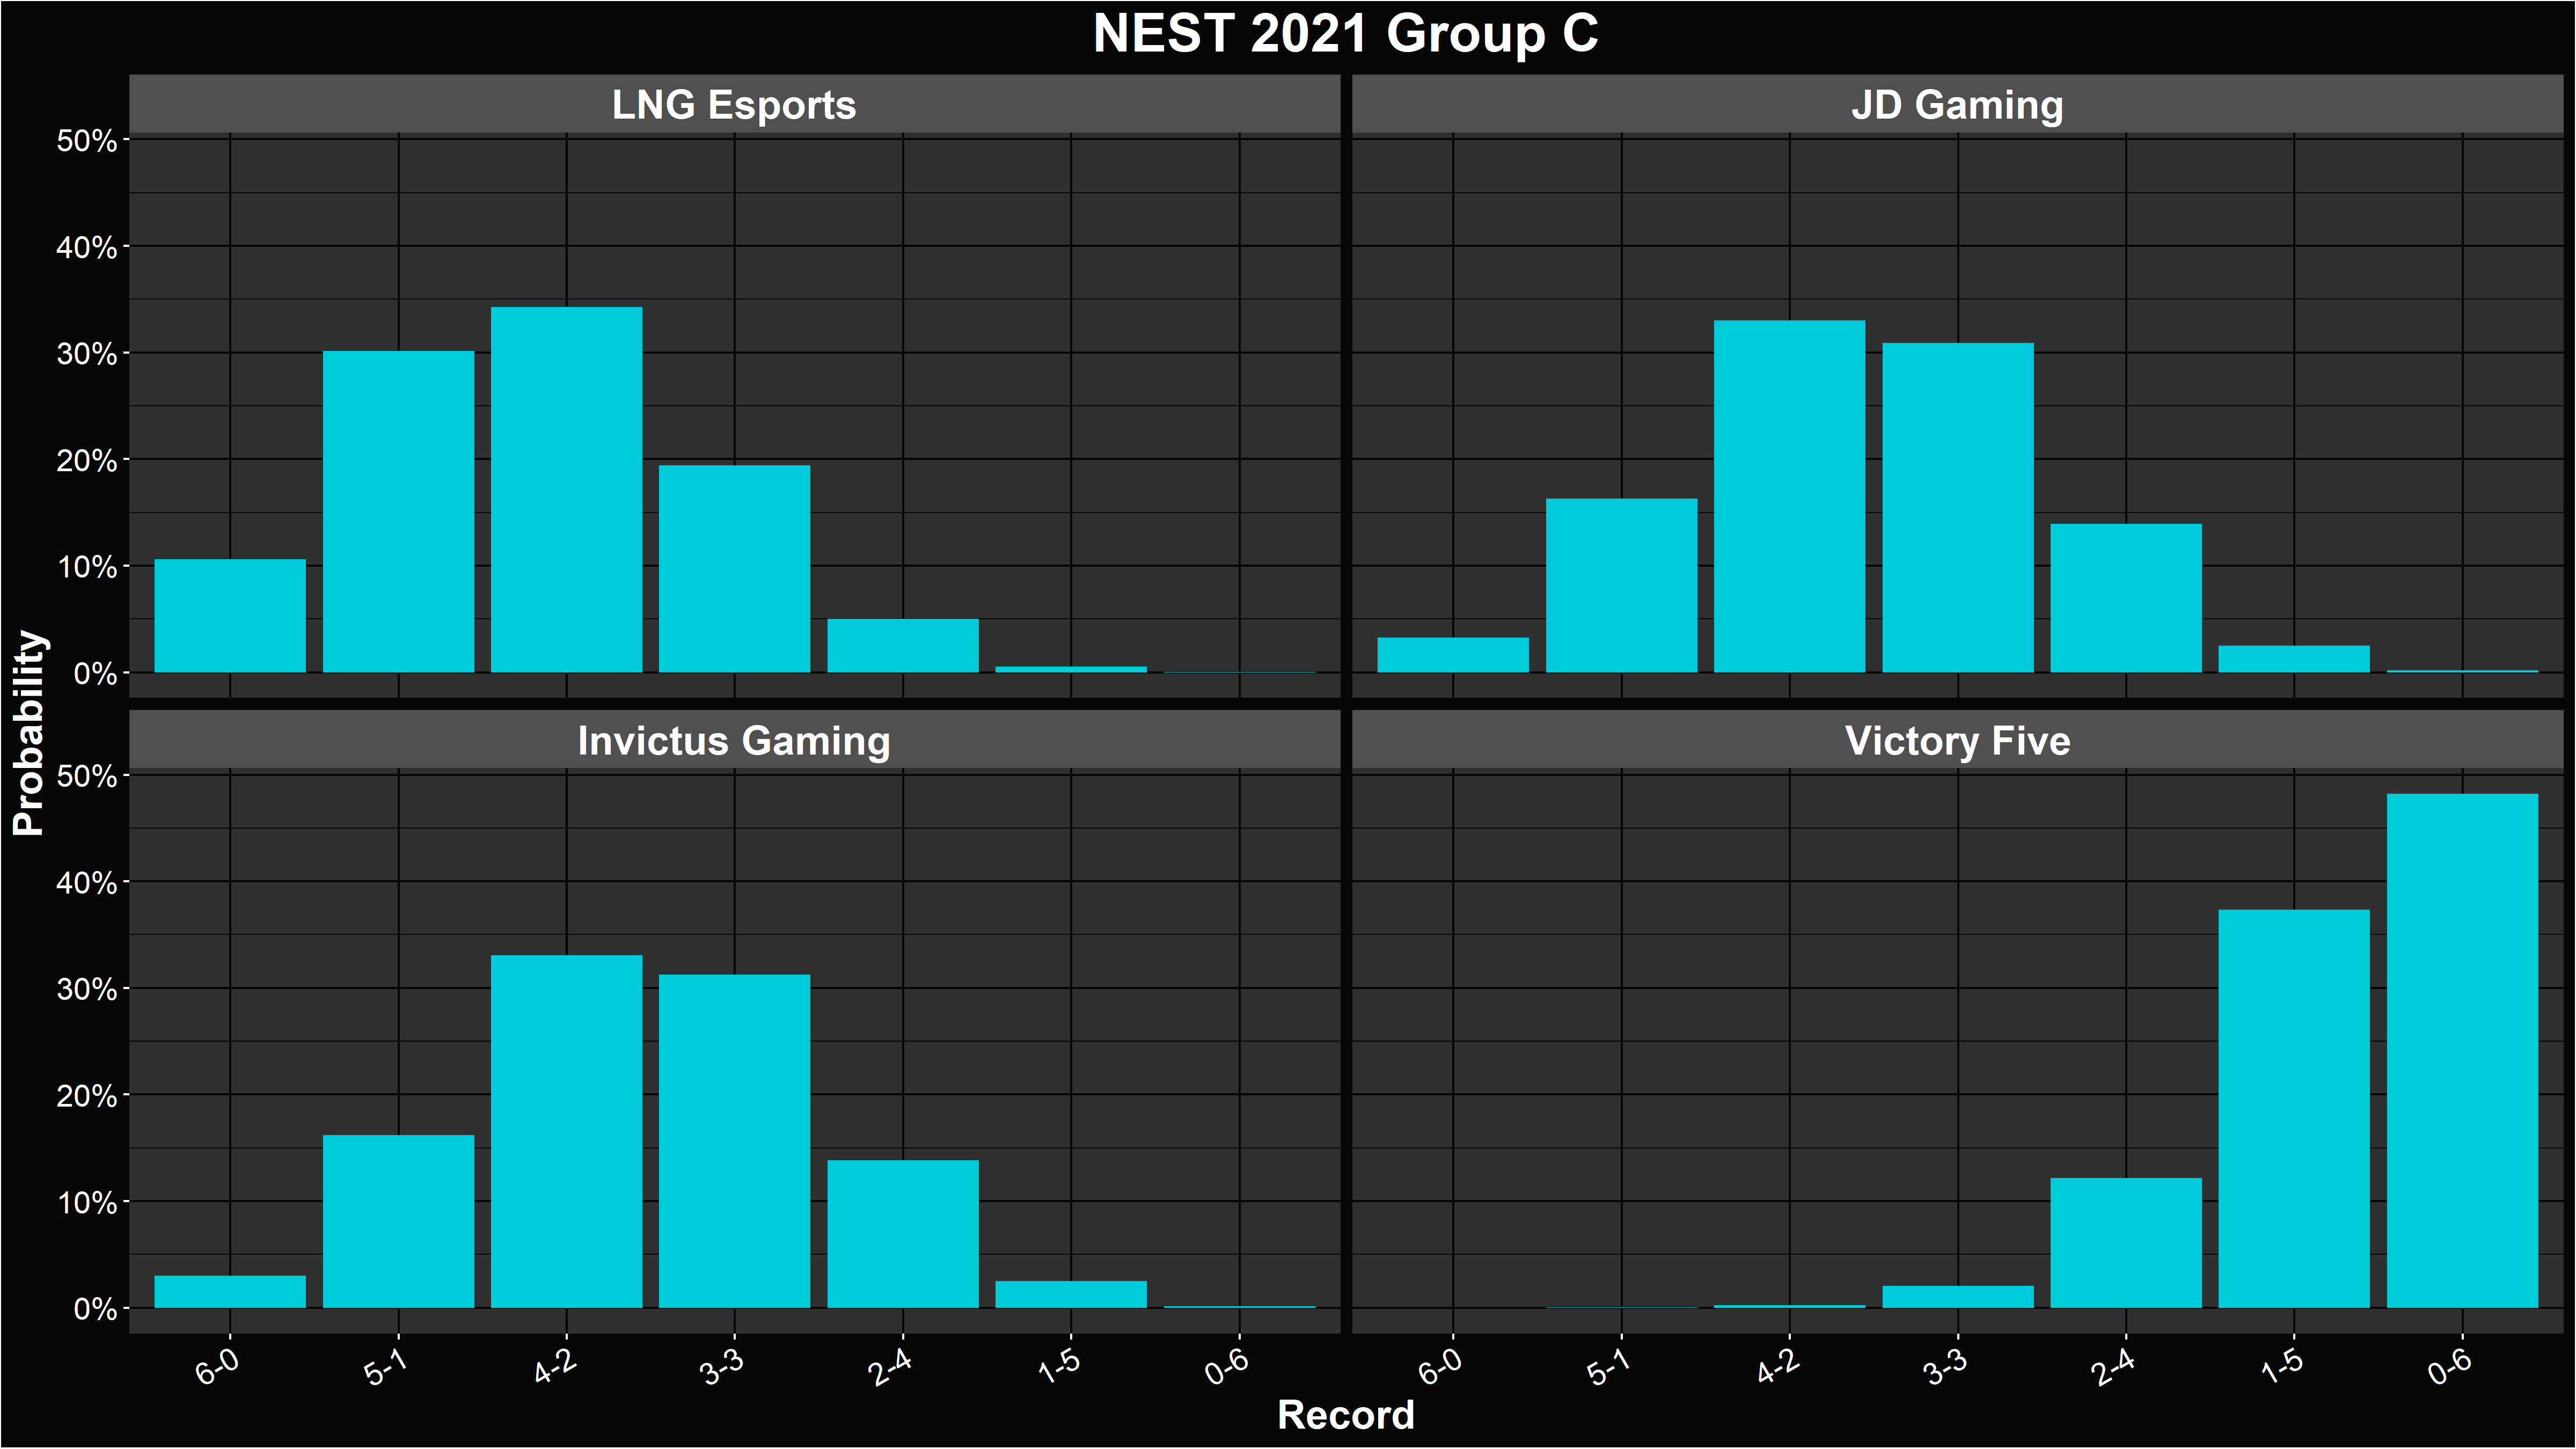 Alacrity's NEST 2021 Group C Record Distributions